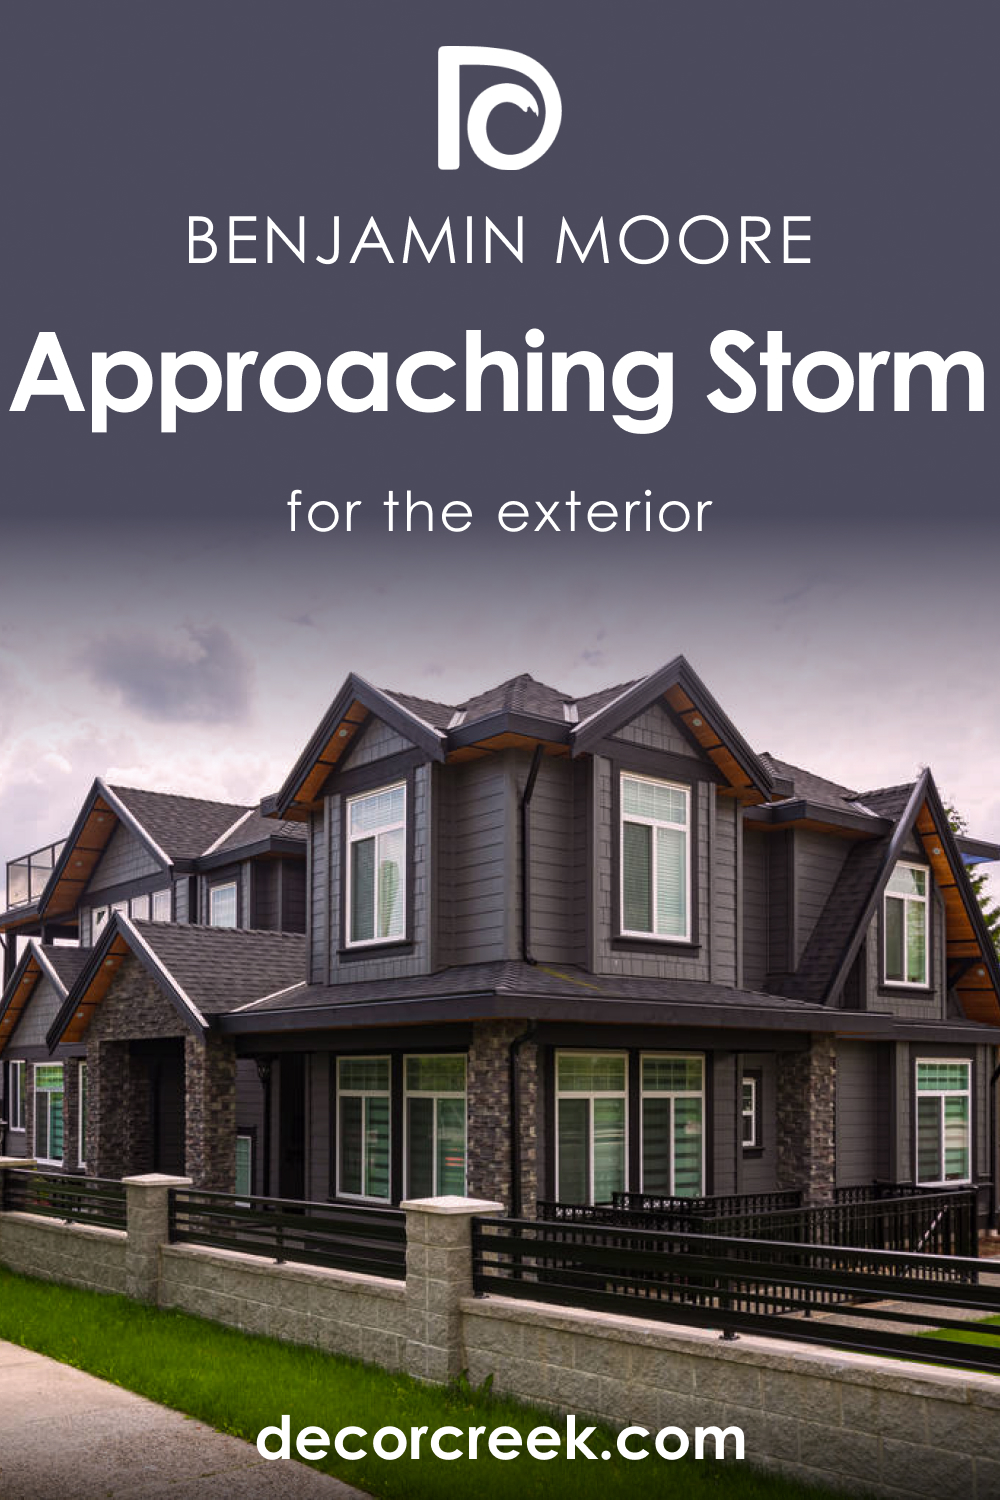 How to Use Approaching Storm CSP-535 for an Exterior?